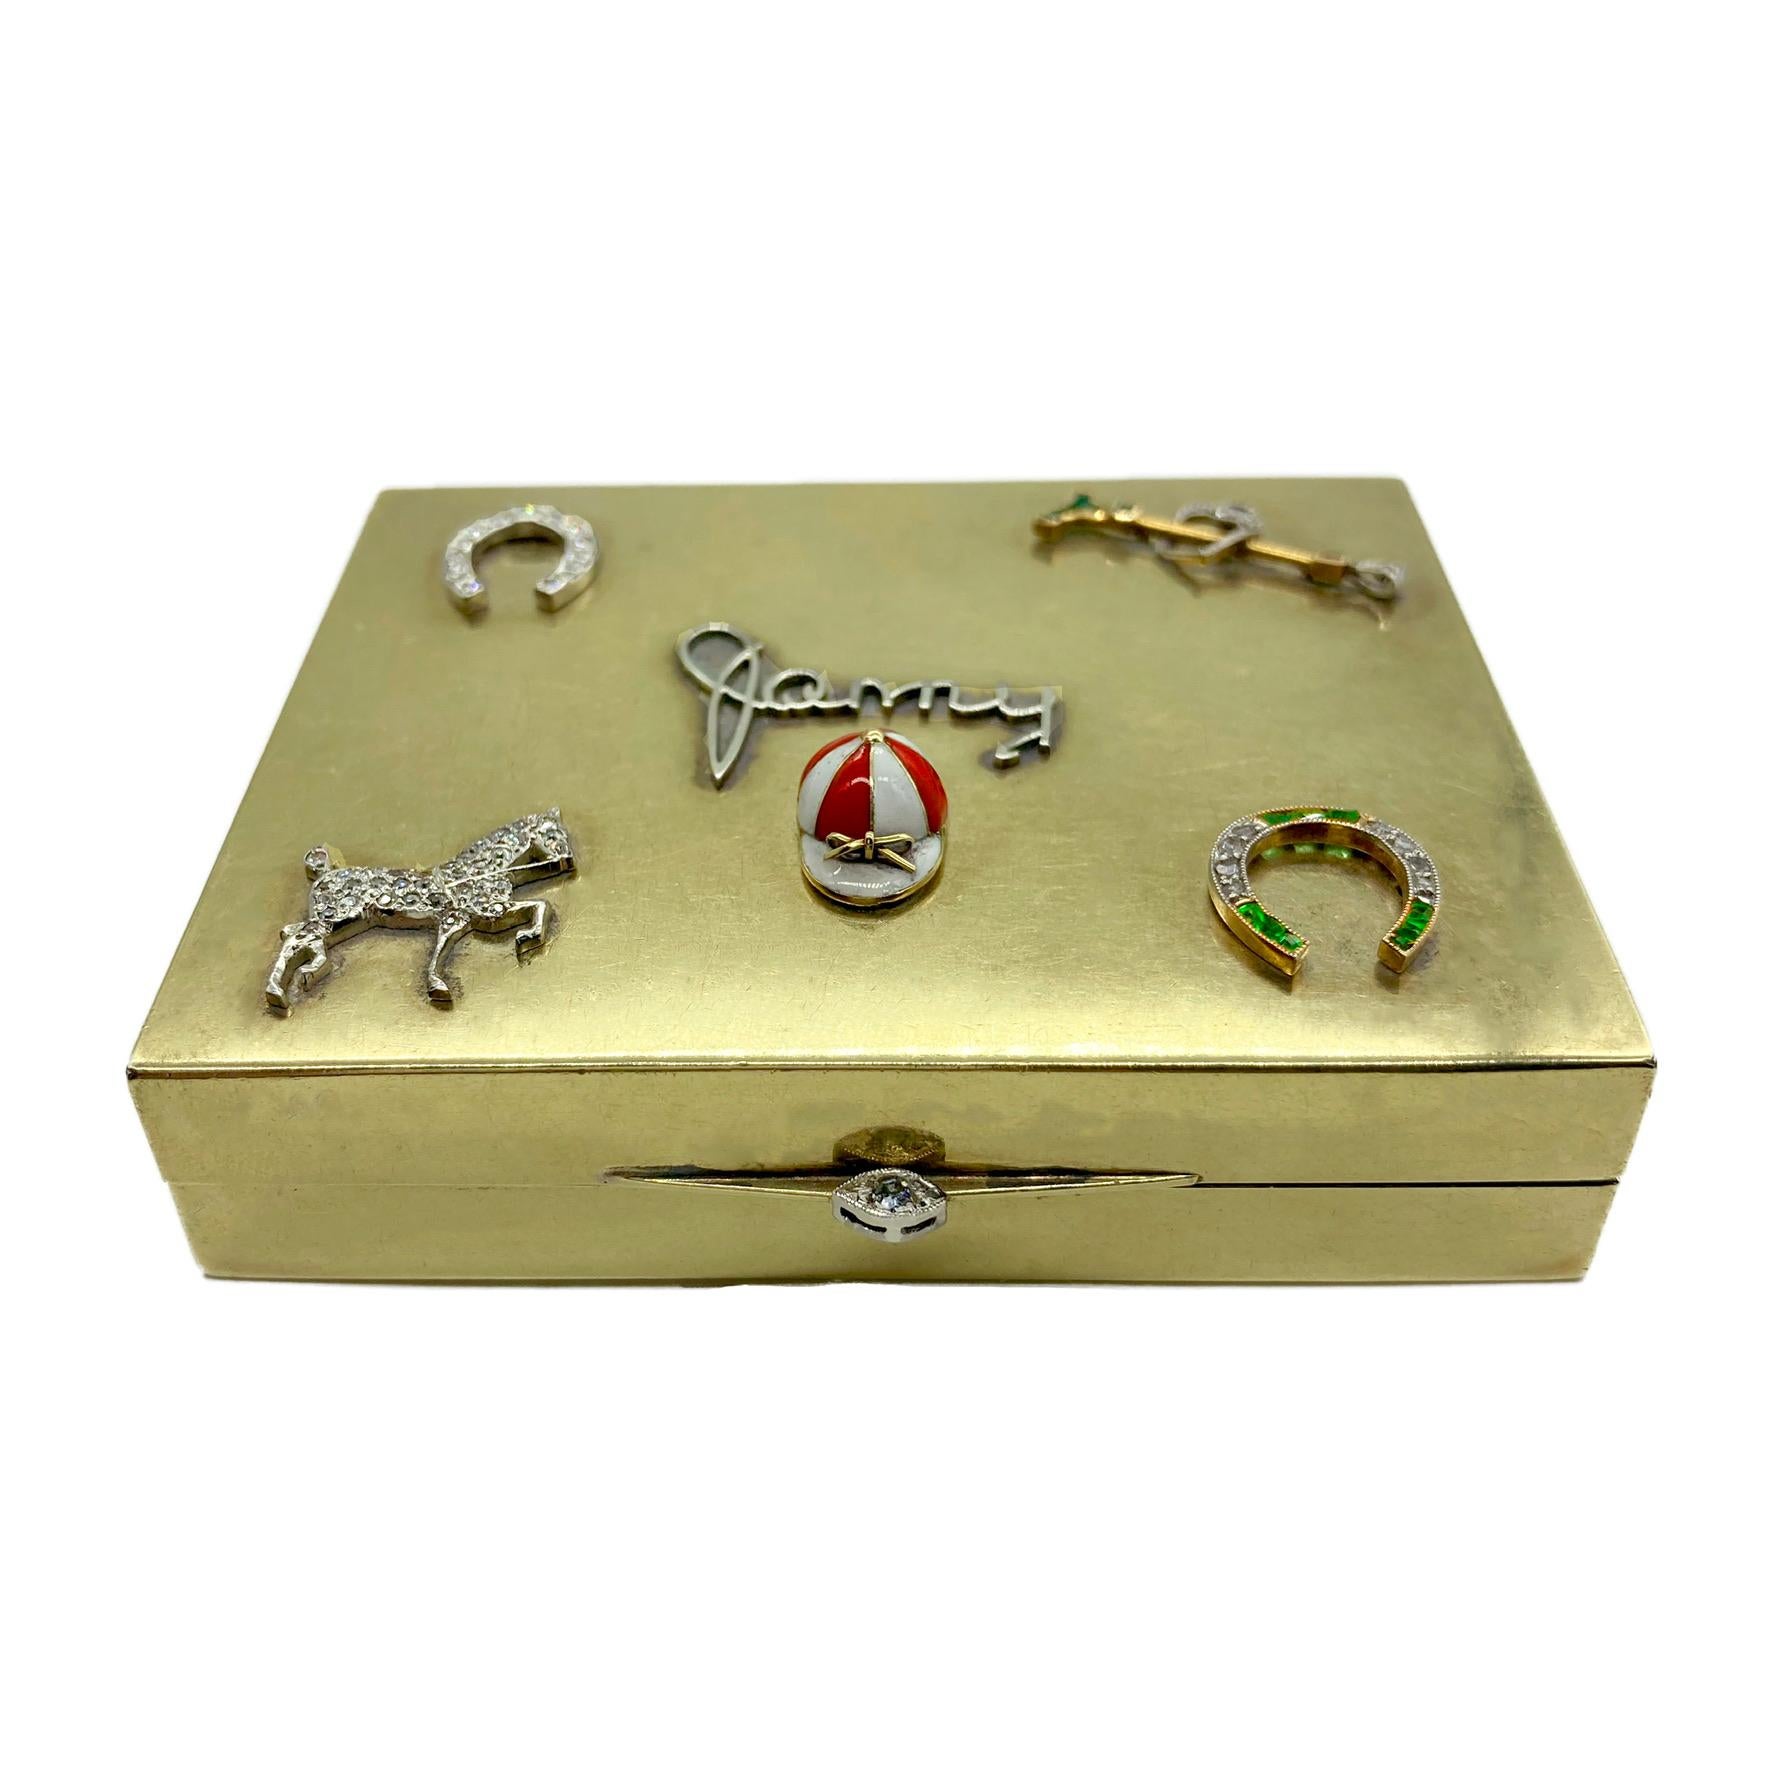 A retro 14 karat yellow gold and sterling silver box featuring a polo theme. Decorated with two horseshoes, a horse, and a polo mallet, all encrusted with diamonds and emeralds. Centering the name “Jenny” with an enamel polo hat beneath and the